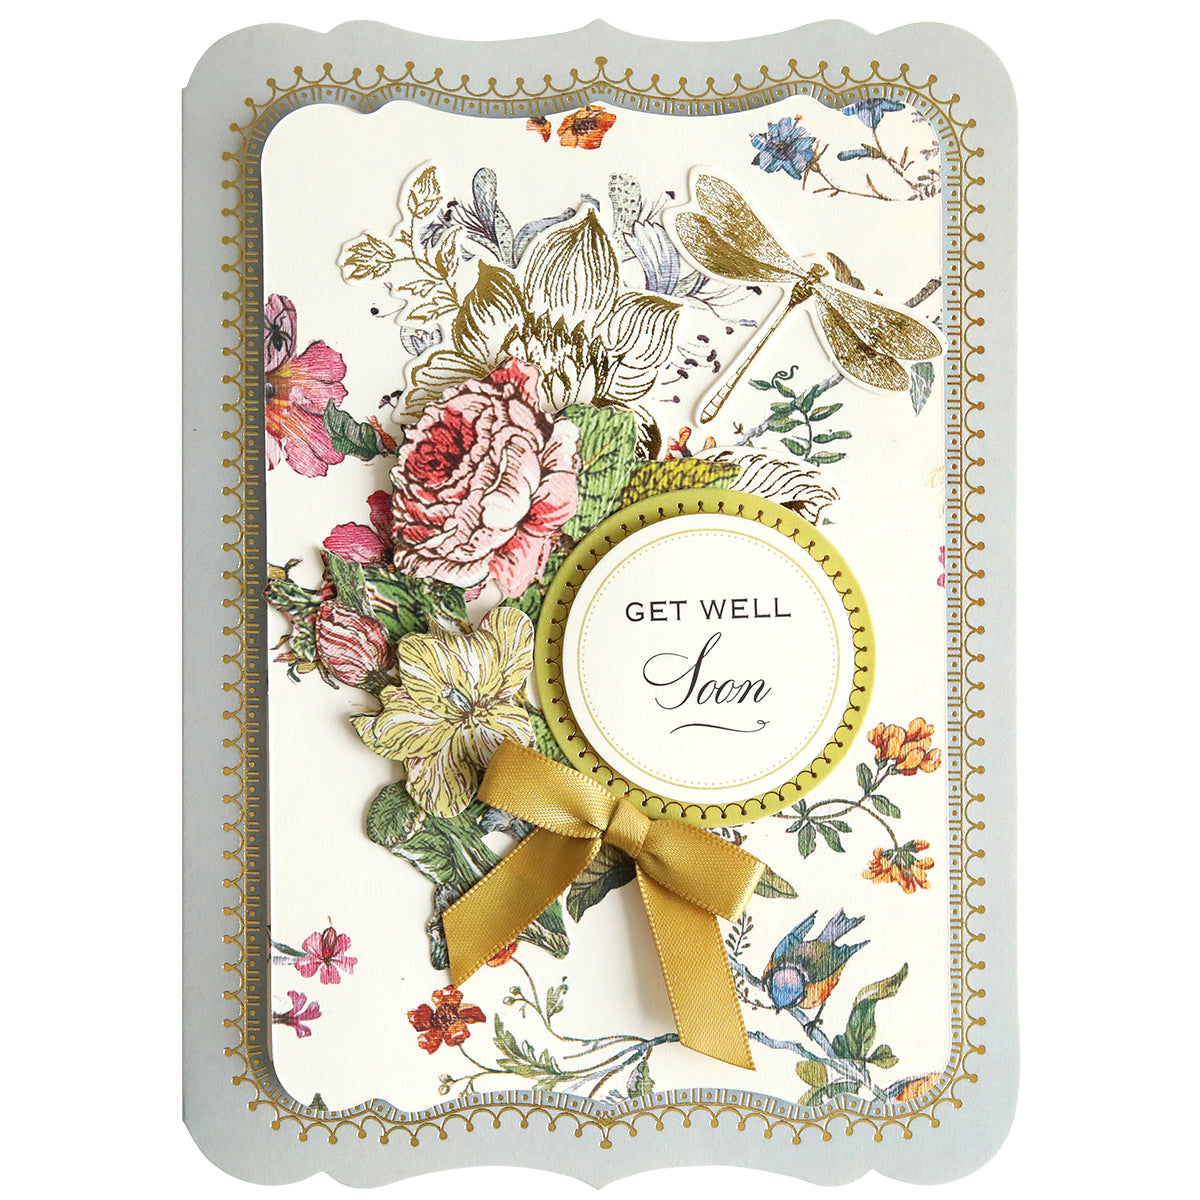 A "get well soon" handmade card adorned with floral and butterfly illustrations from the Simply Wildflower Meadow Card Making Kit, featuring a yellow ribbon.